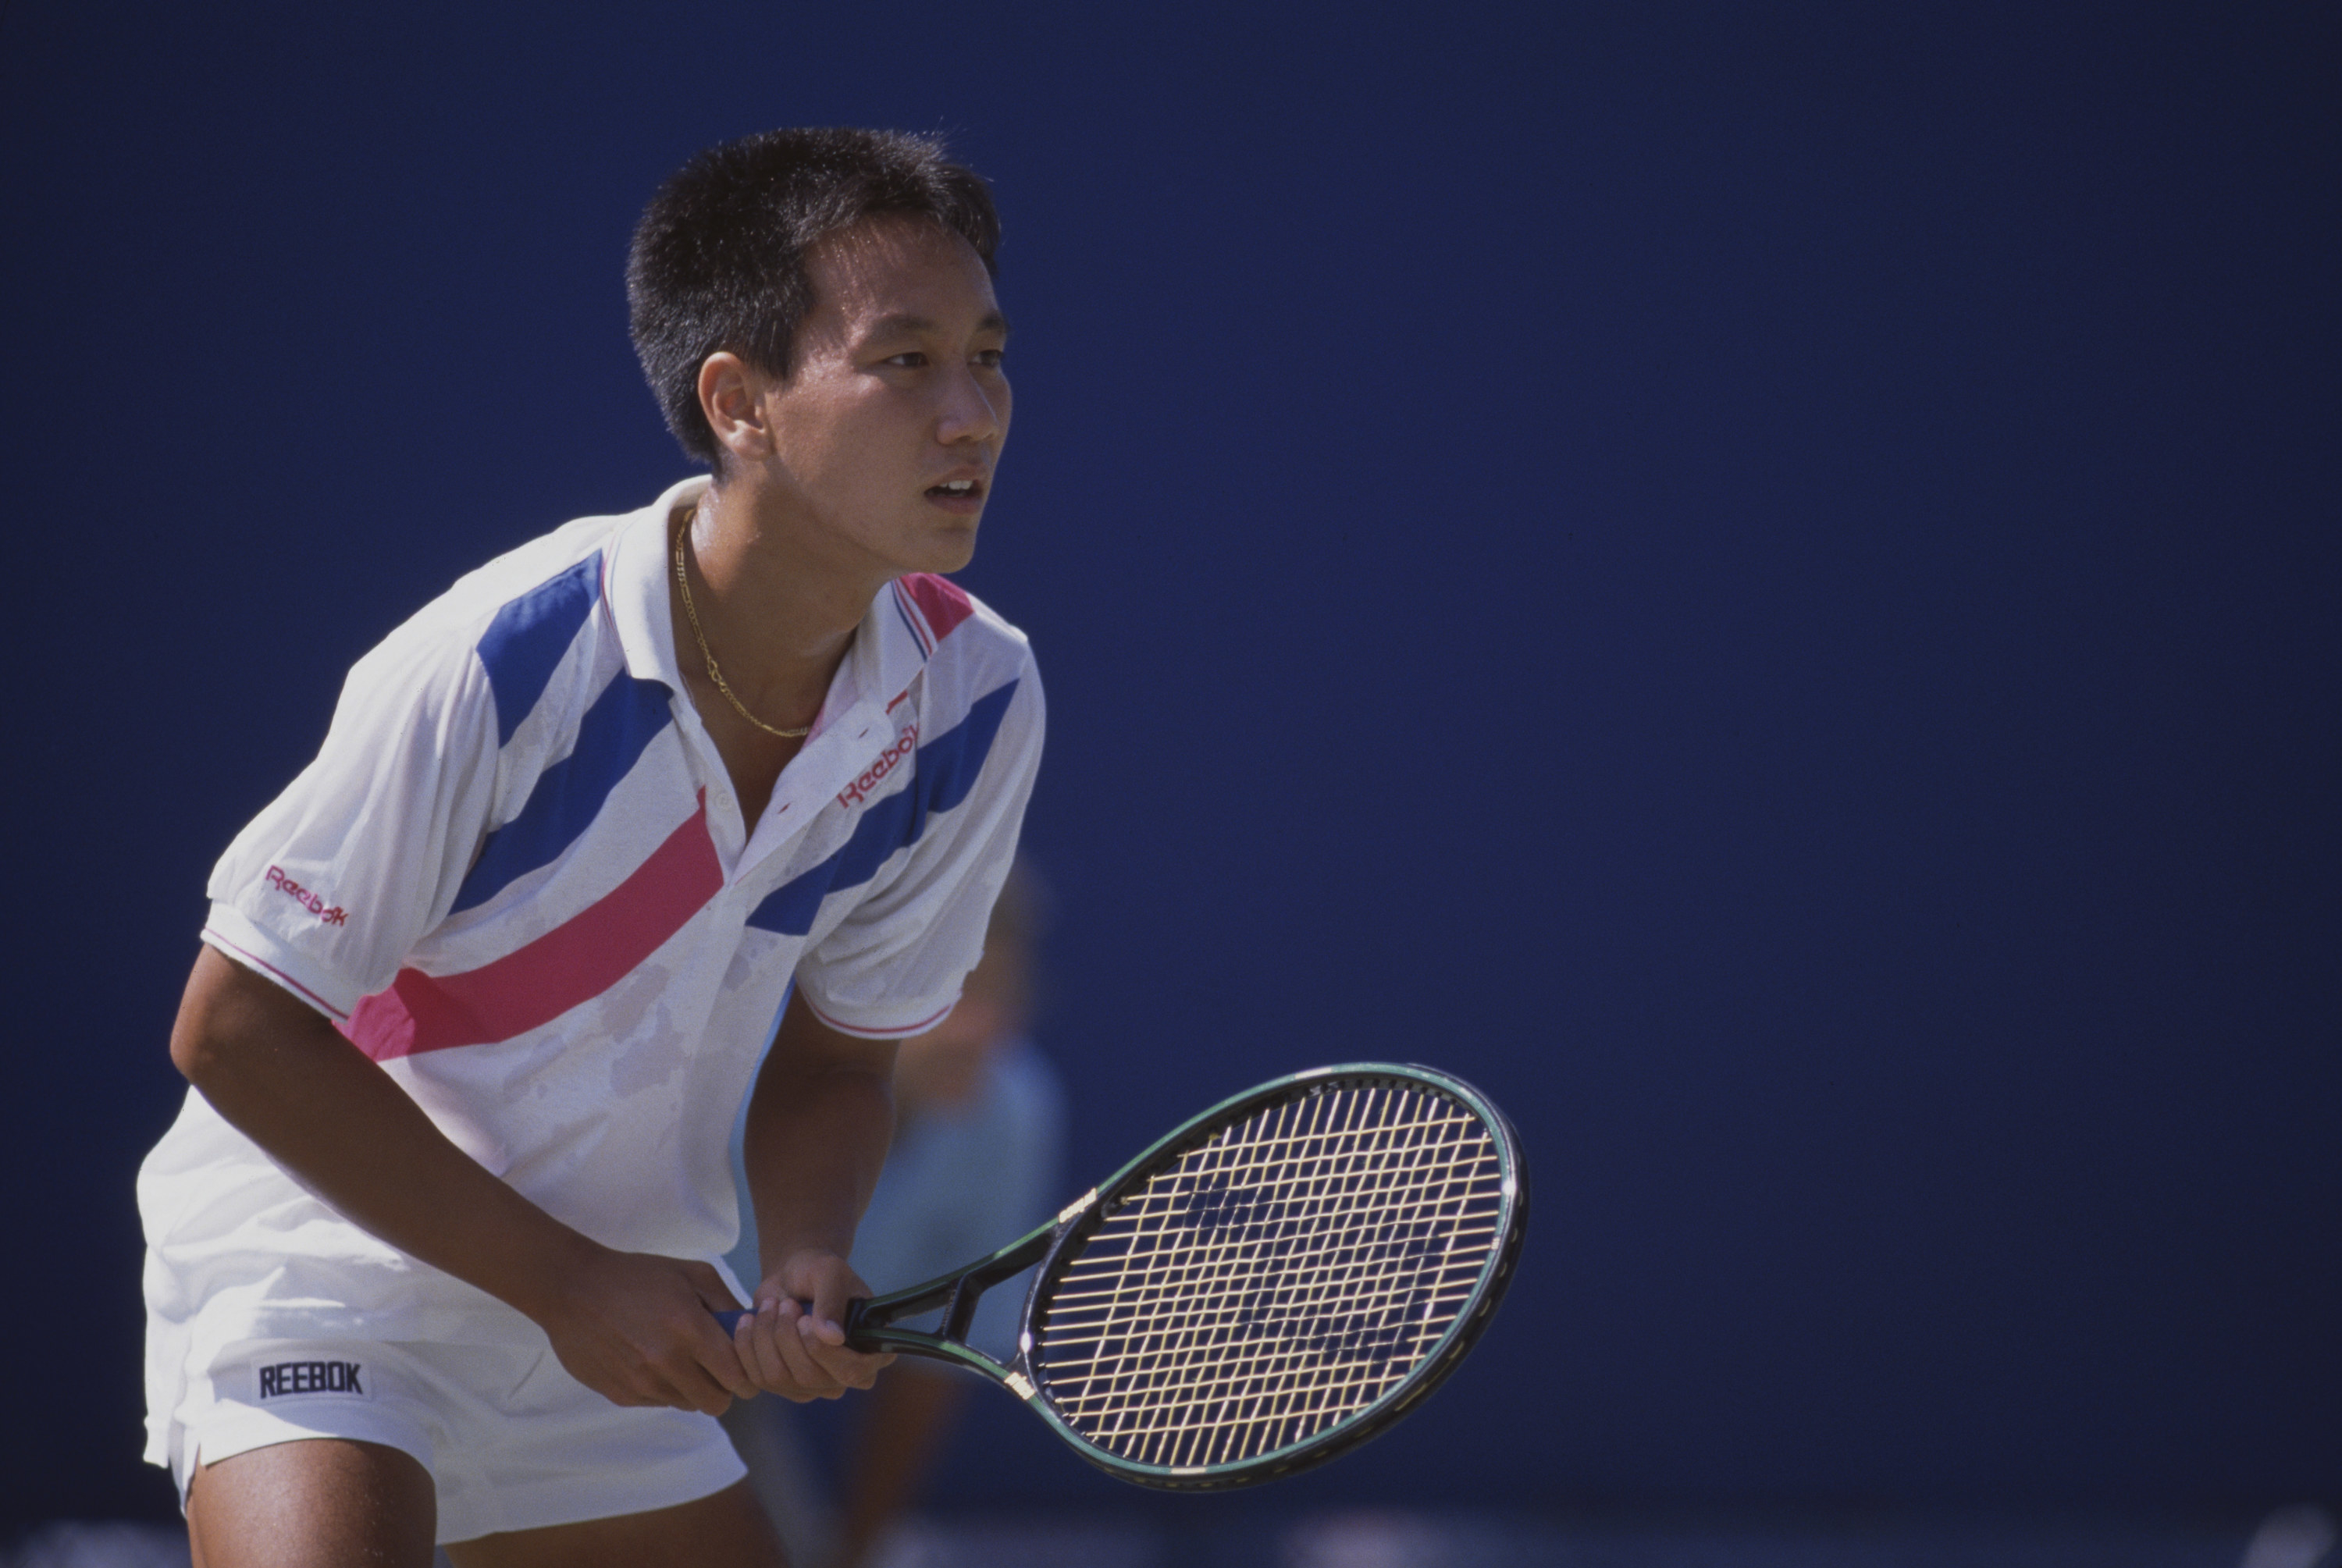 Michael Chang with a tennis racket